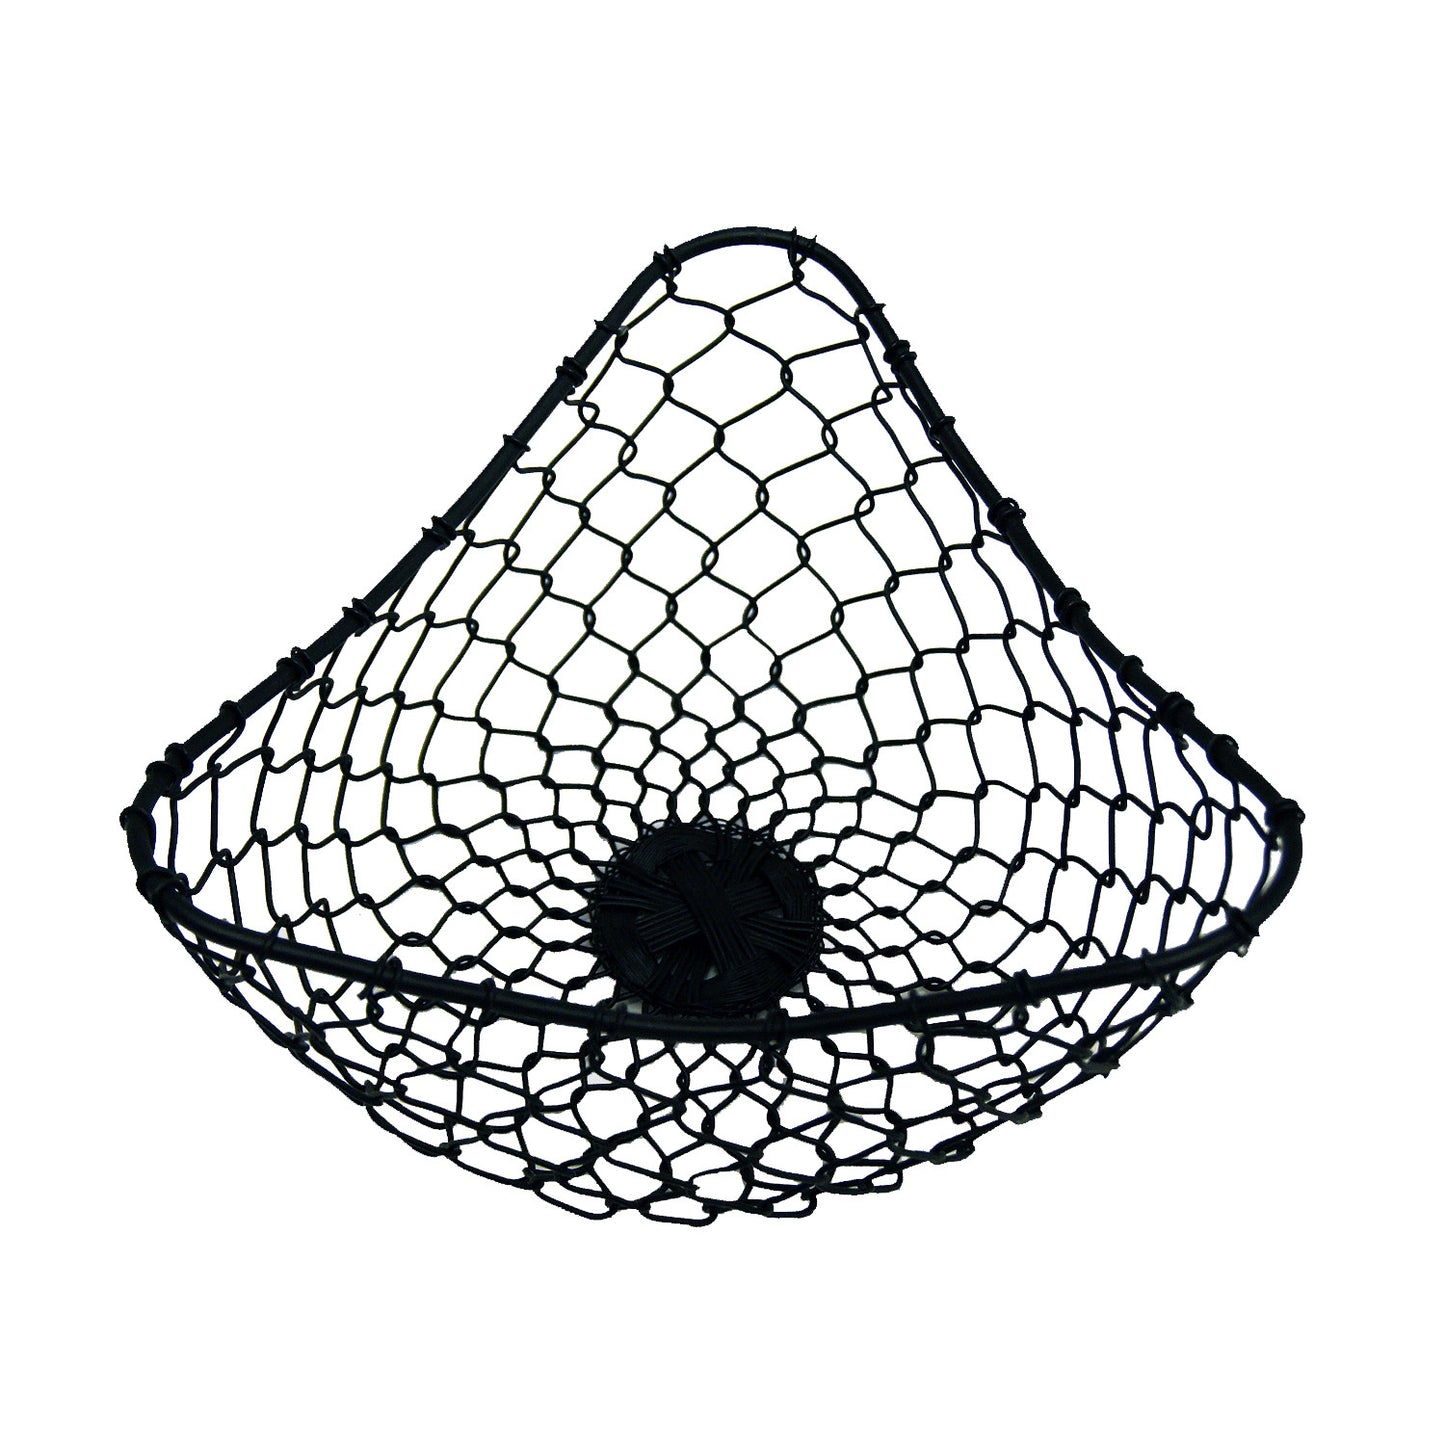 GiftBay 901(S/3) Strongly Built Wire Basket Set of 3 Black Powder Coated Finish for Fruits, Breads, Vegetables, Flowers Display